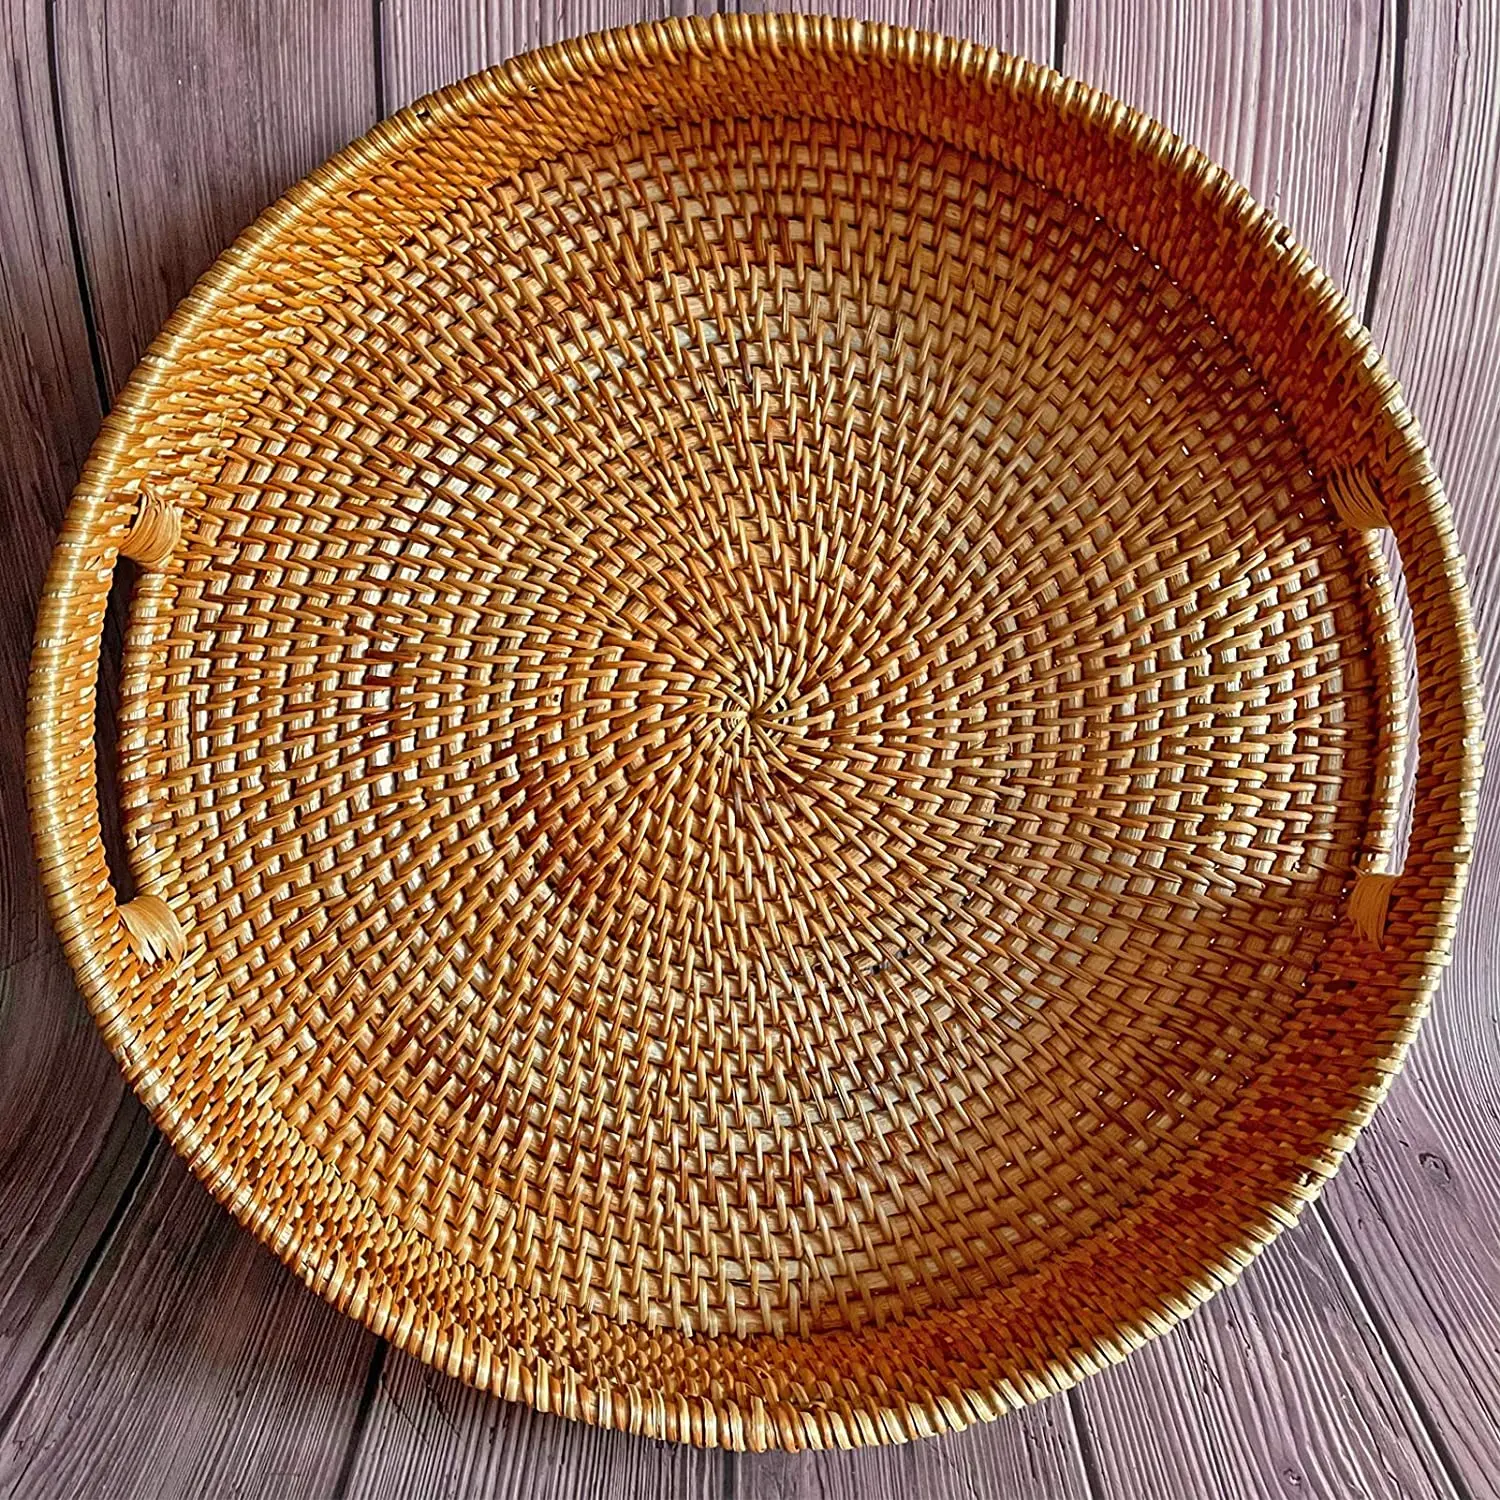 

Handmade Natural Round Rattan Serving Tray with Wooden Handles, Food Serving Woven Tray for Breakfast, Drinks, Snacks